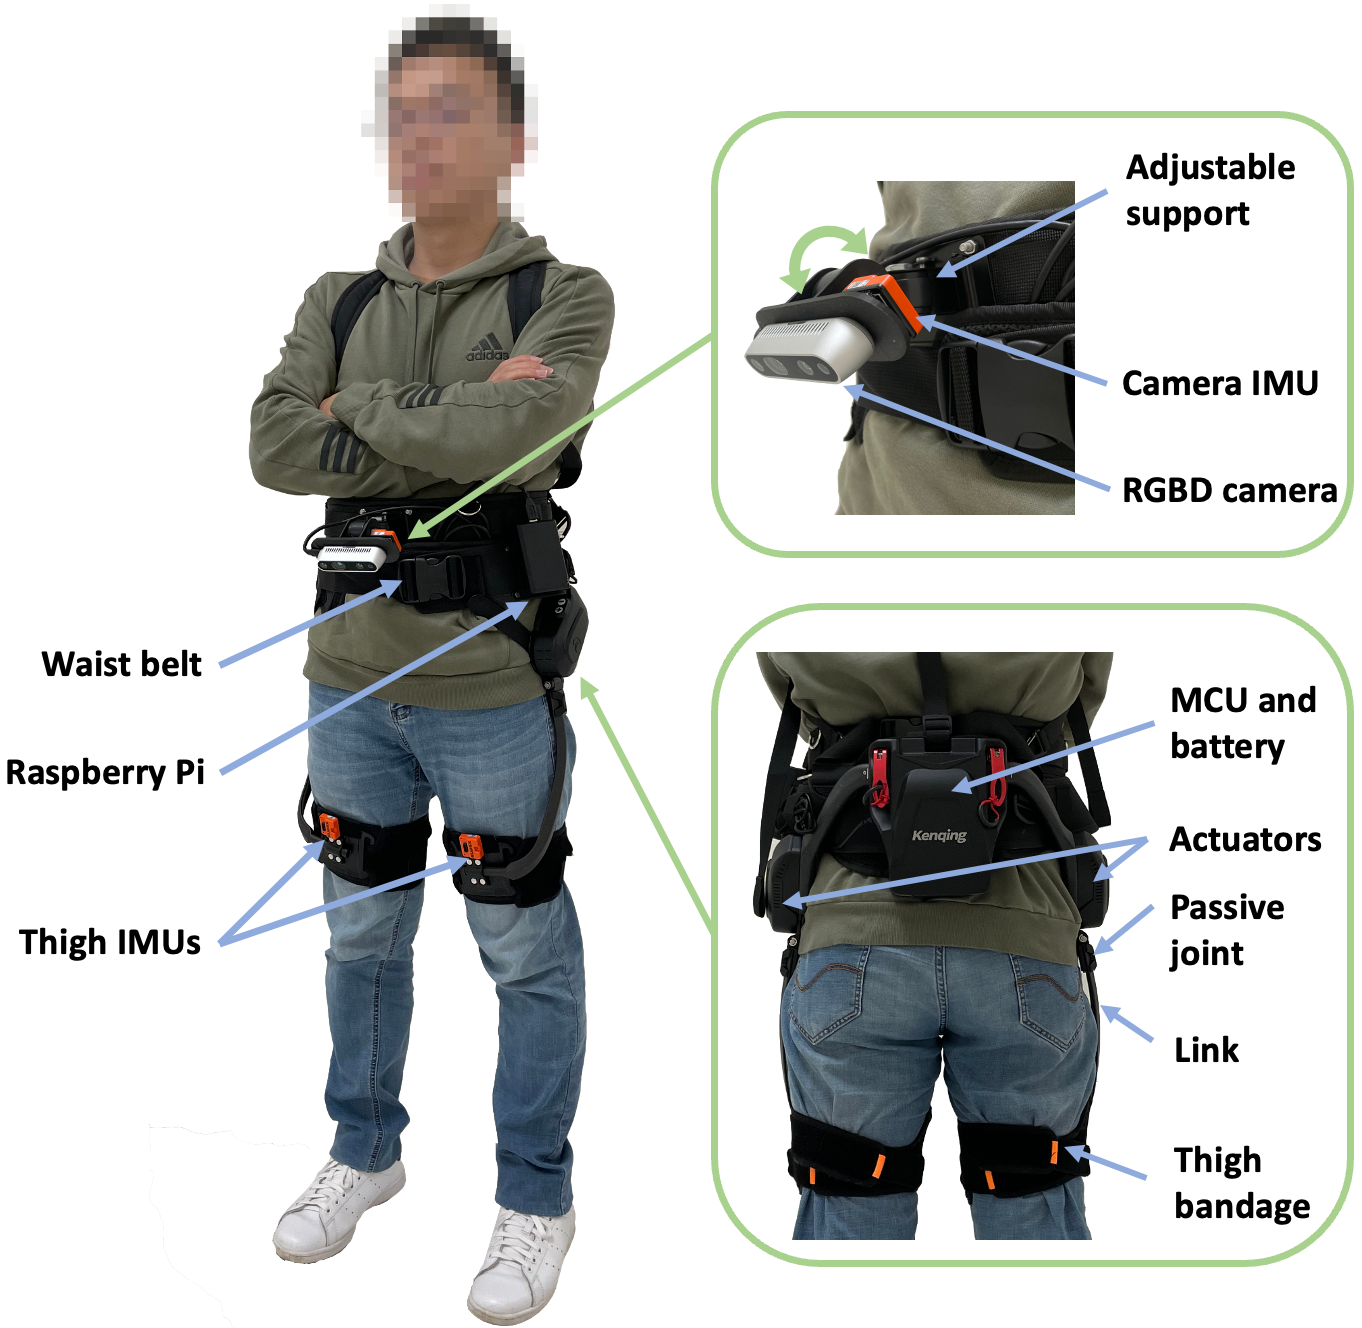 an image of a person wearing a powered hip exoskeleton